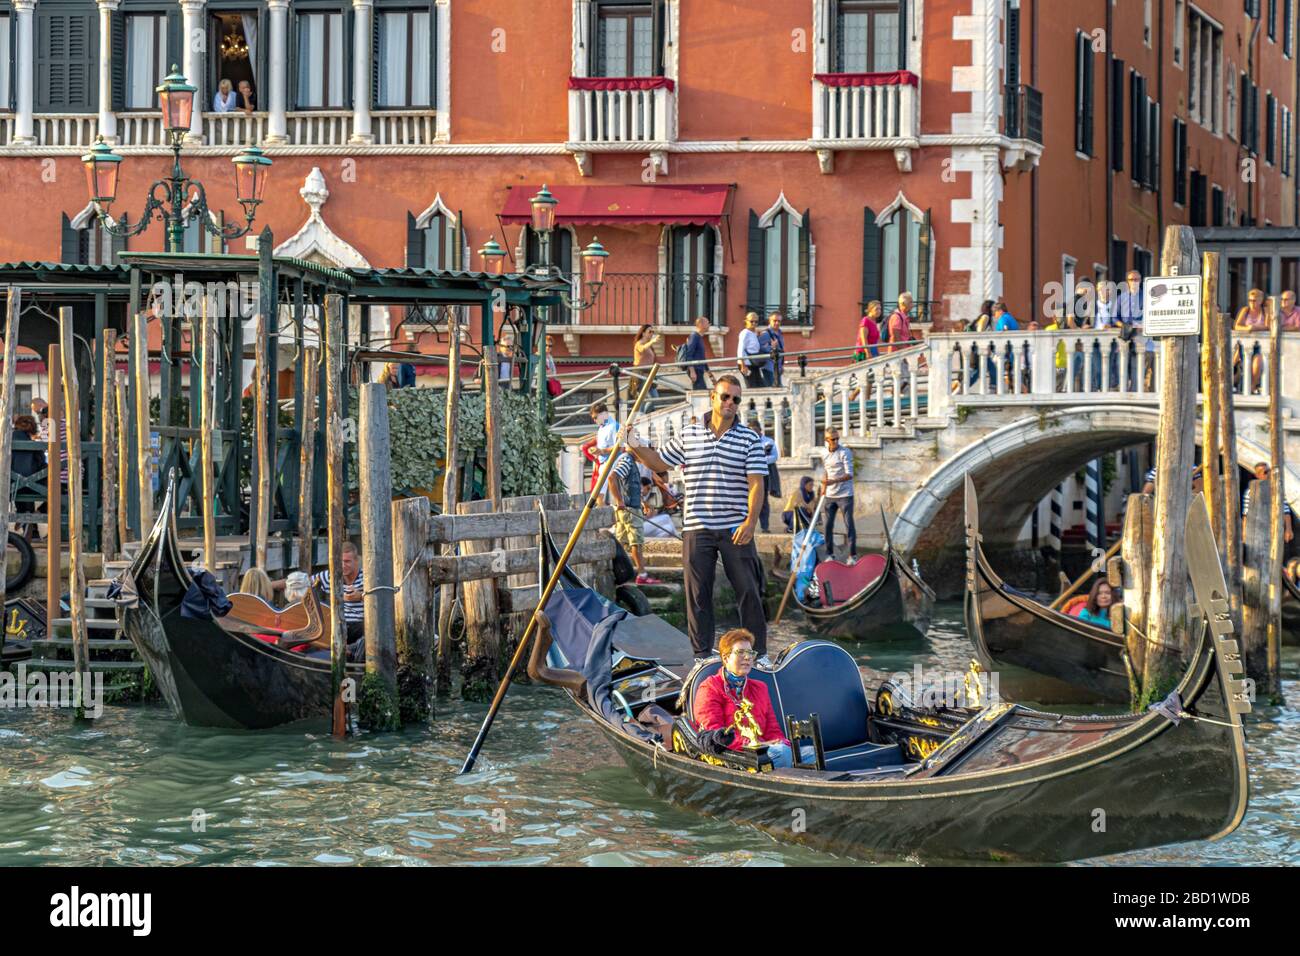 Two people watch from a balcony at The Hotel Danieli as Gondoliers take tourists for a gondola ride on The Grand Canal ,Venice Italy Stock Photo